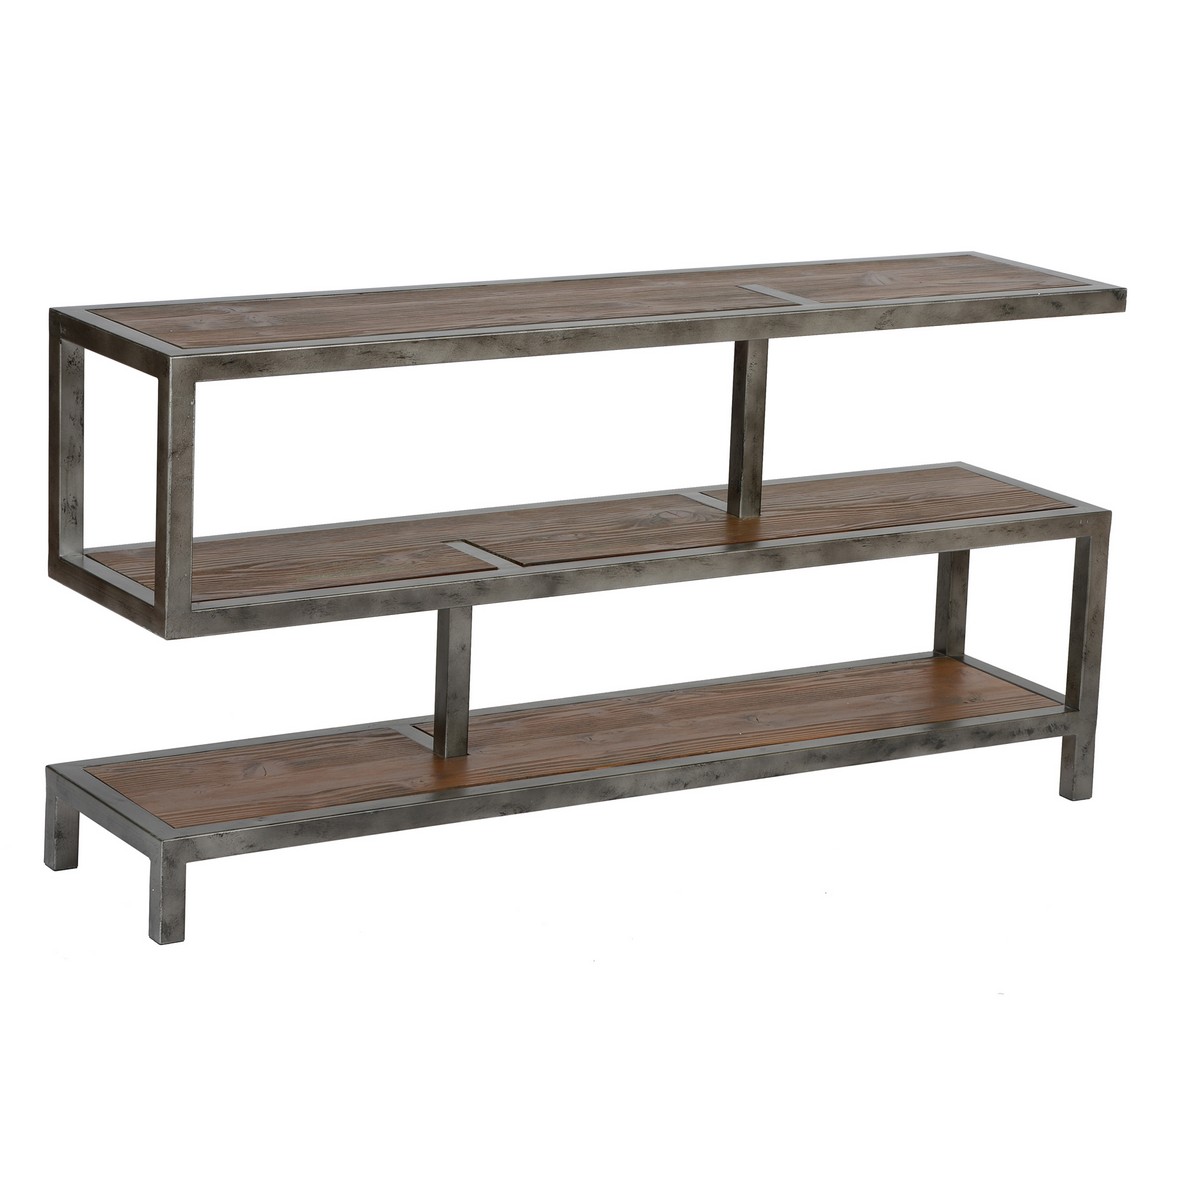 Armen Living Maxton Console Table - Natural